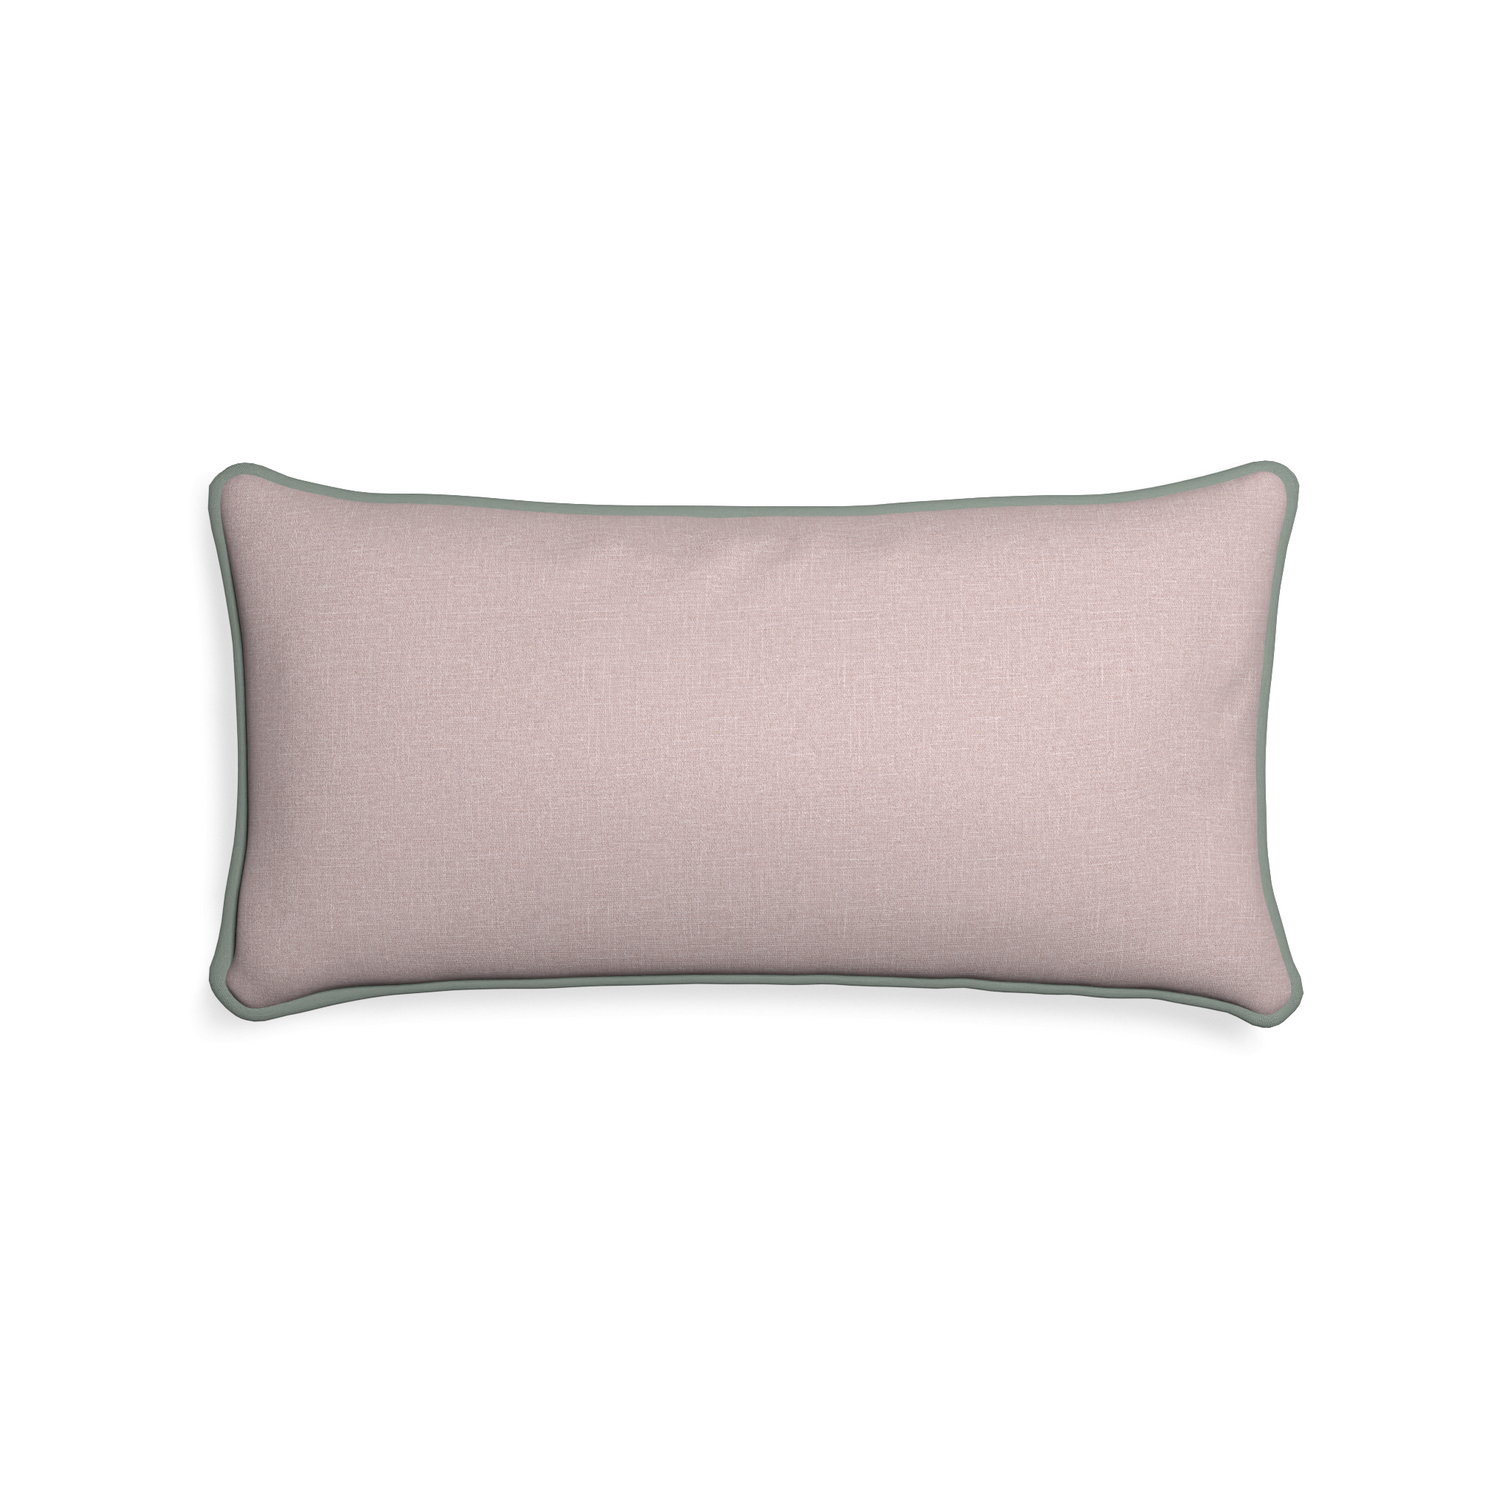 Midi-lumbar orchid custom mauve pinkpillow with sage piping on white background